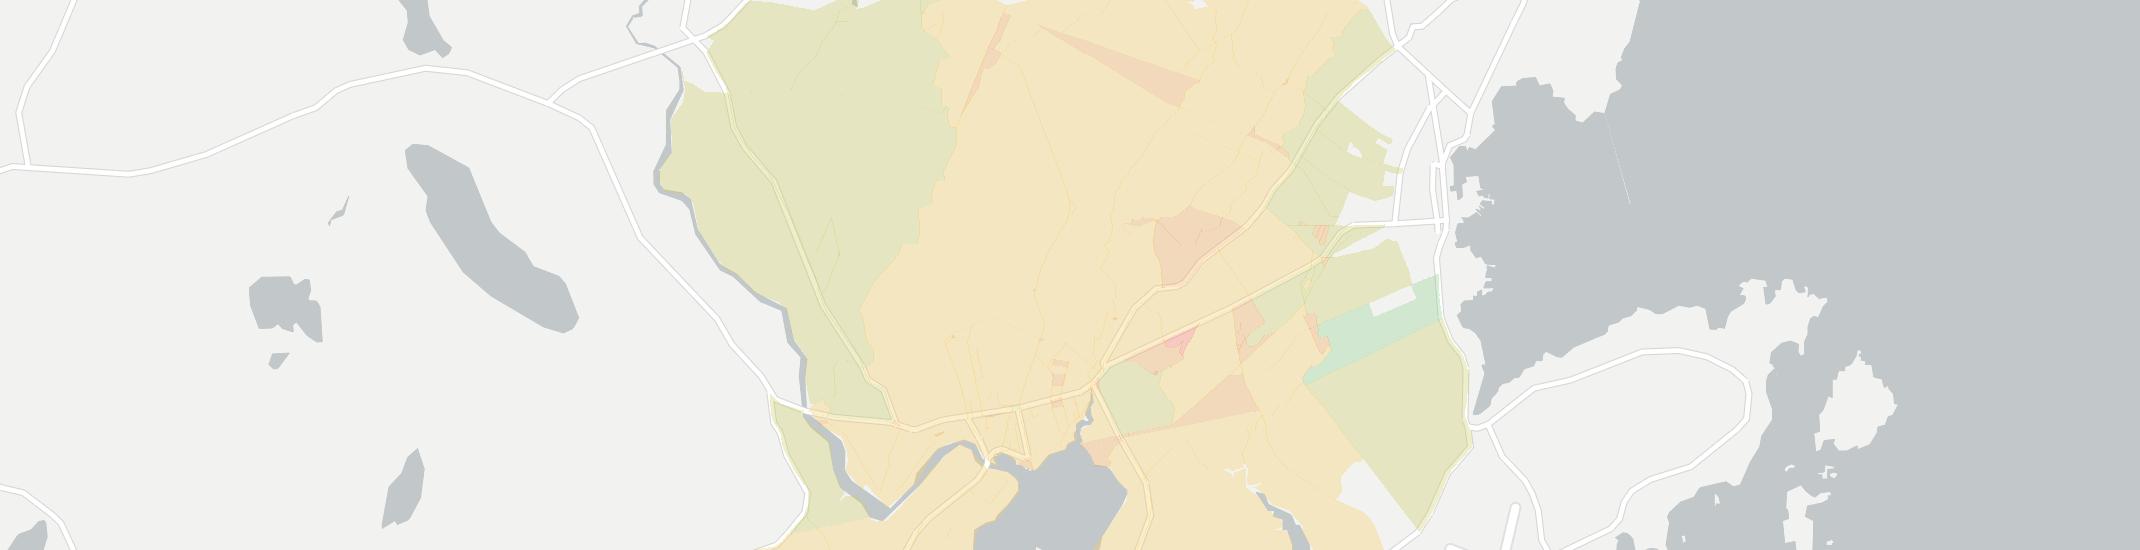 Thomaston Internet Competition Map. Click for interactive map